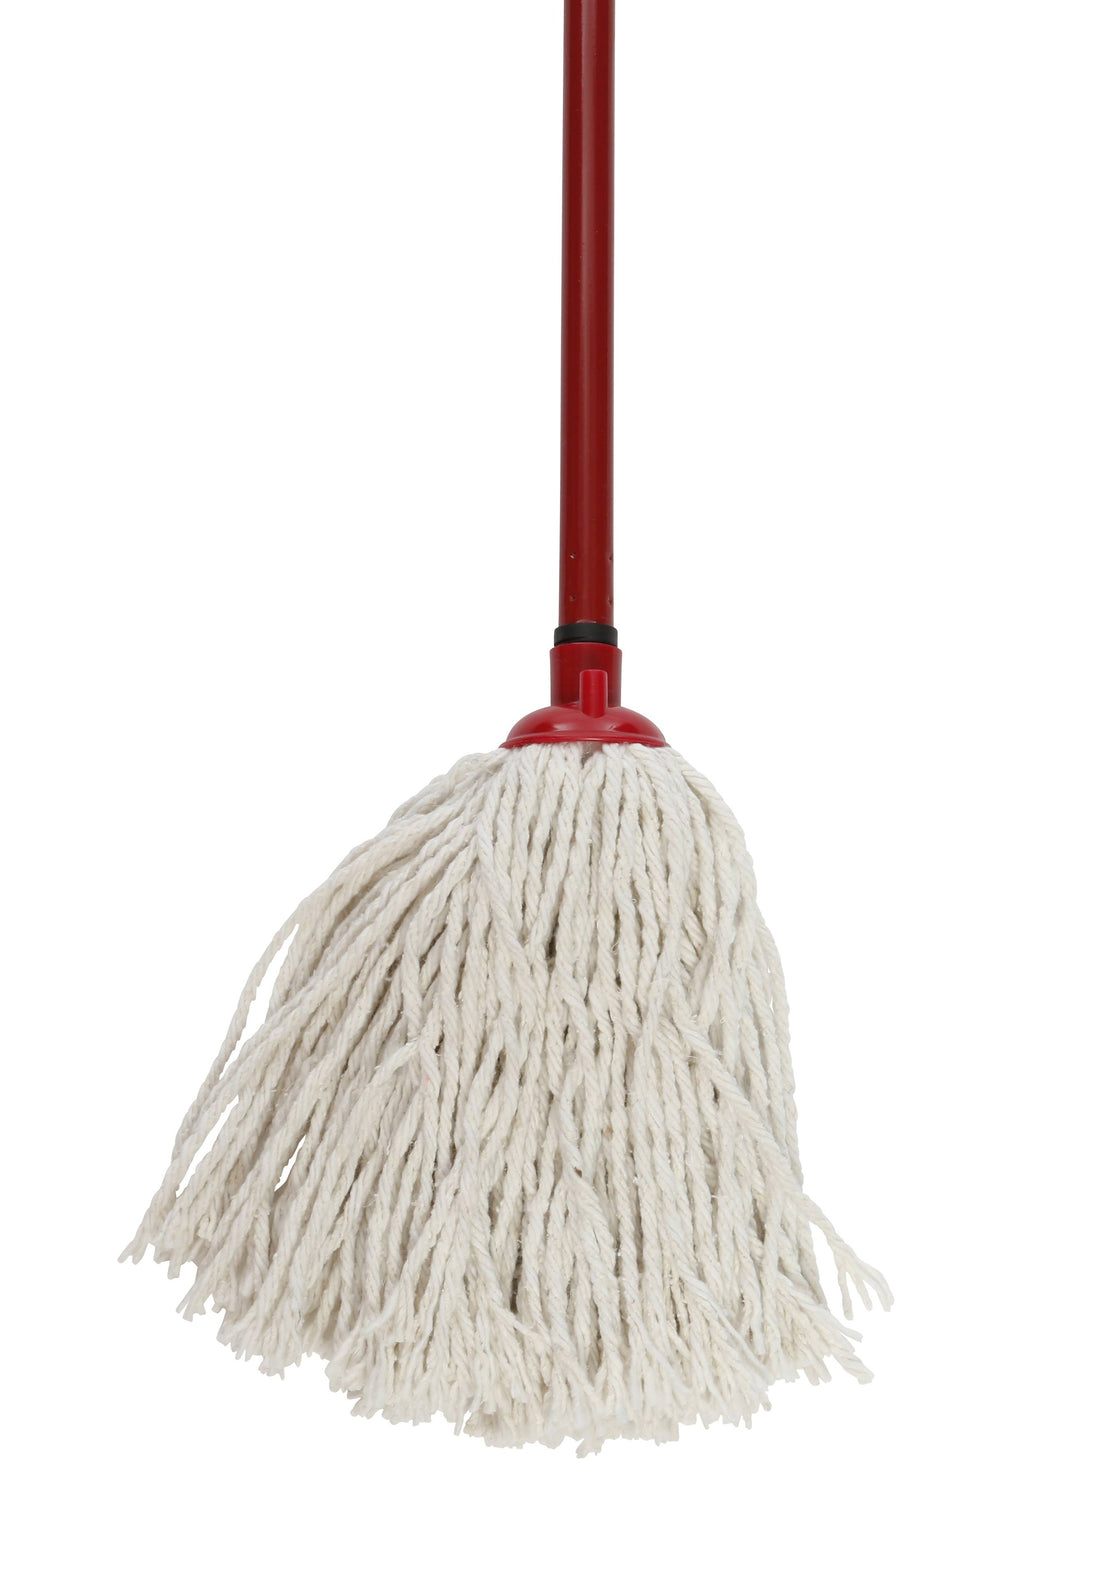 Dosco Cotton Mop &amp; Metal Handle Red